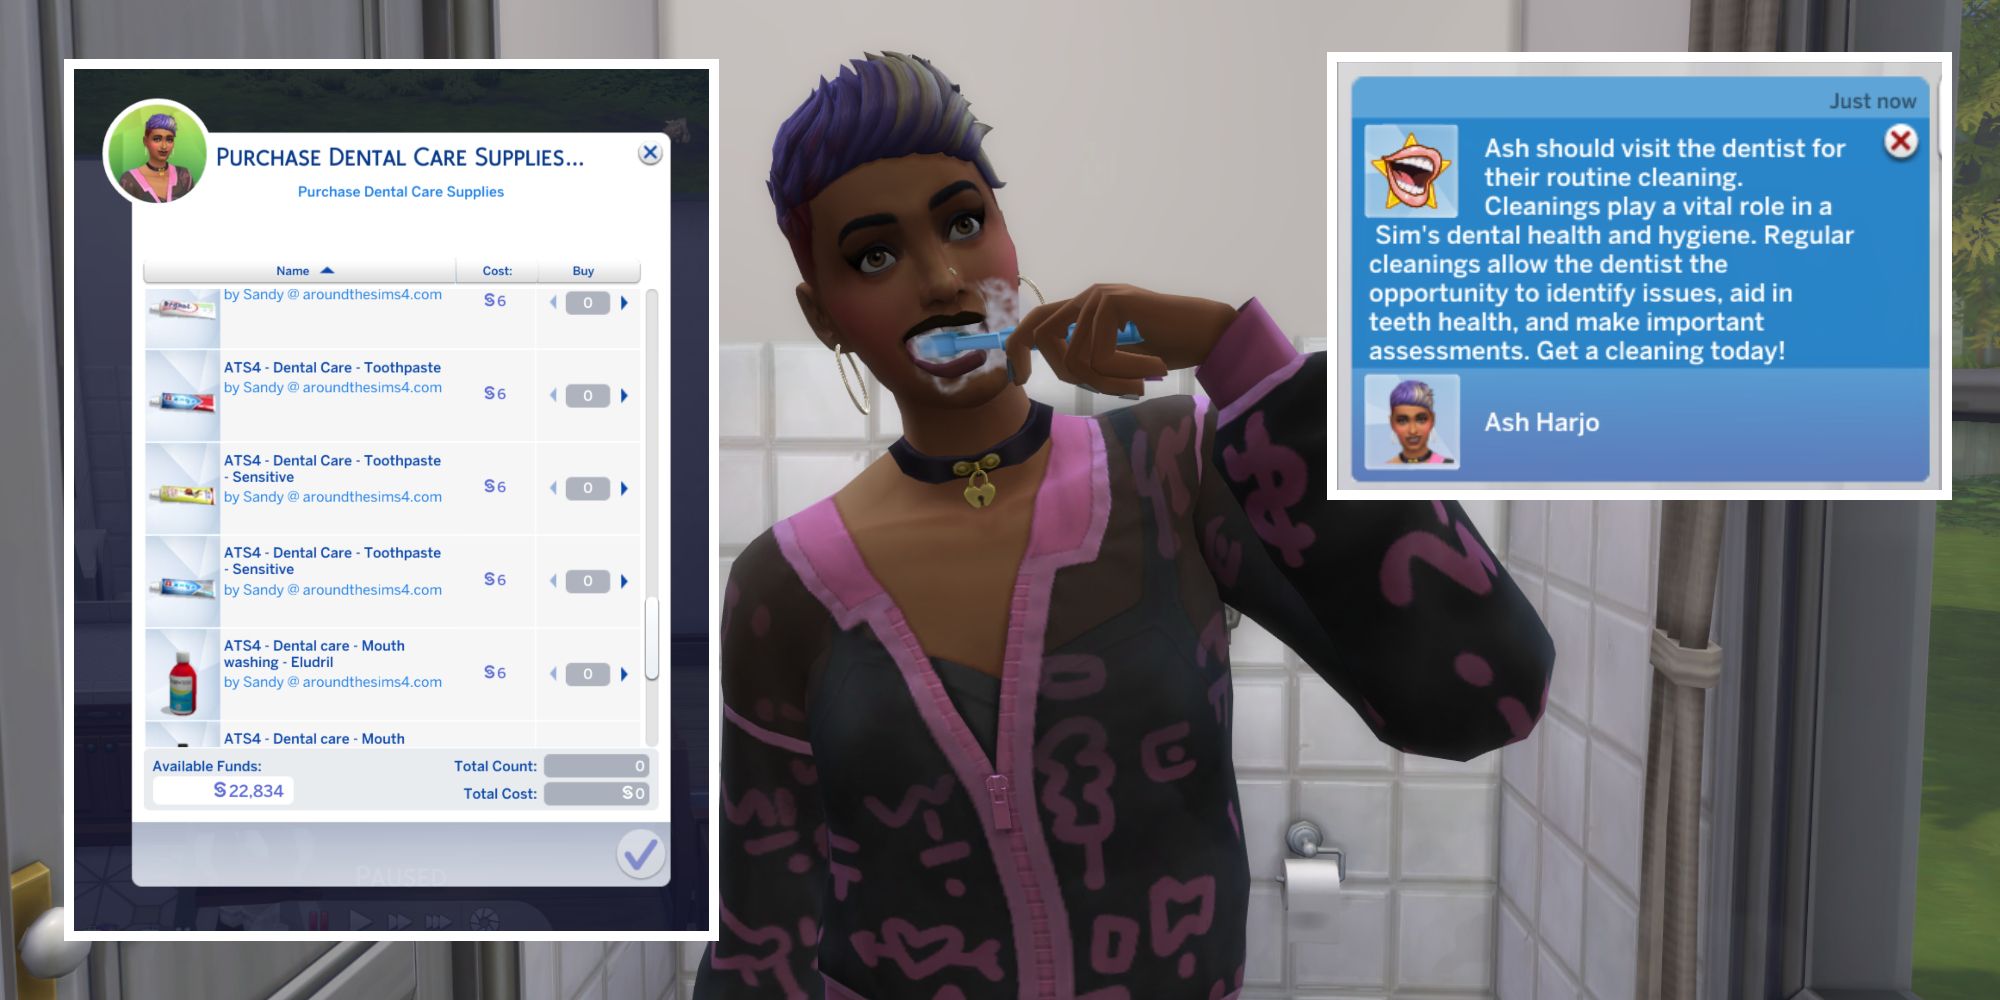 A Sim is brushing their teeth and buying dental care supplies with the Dental Care Mod